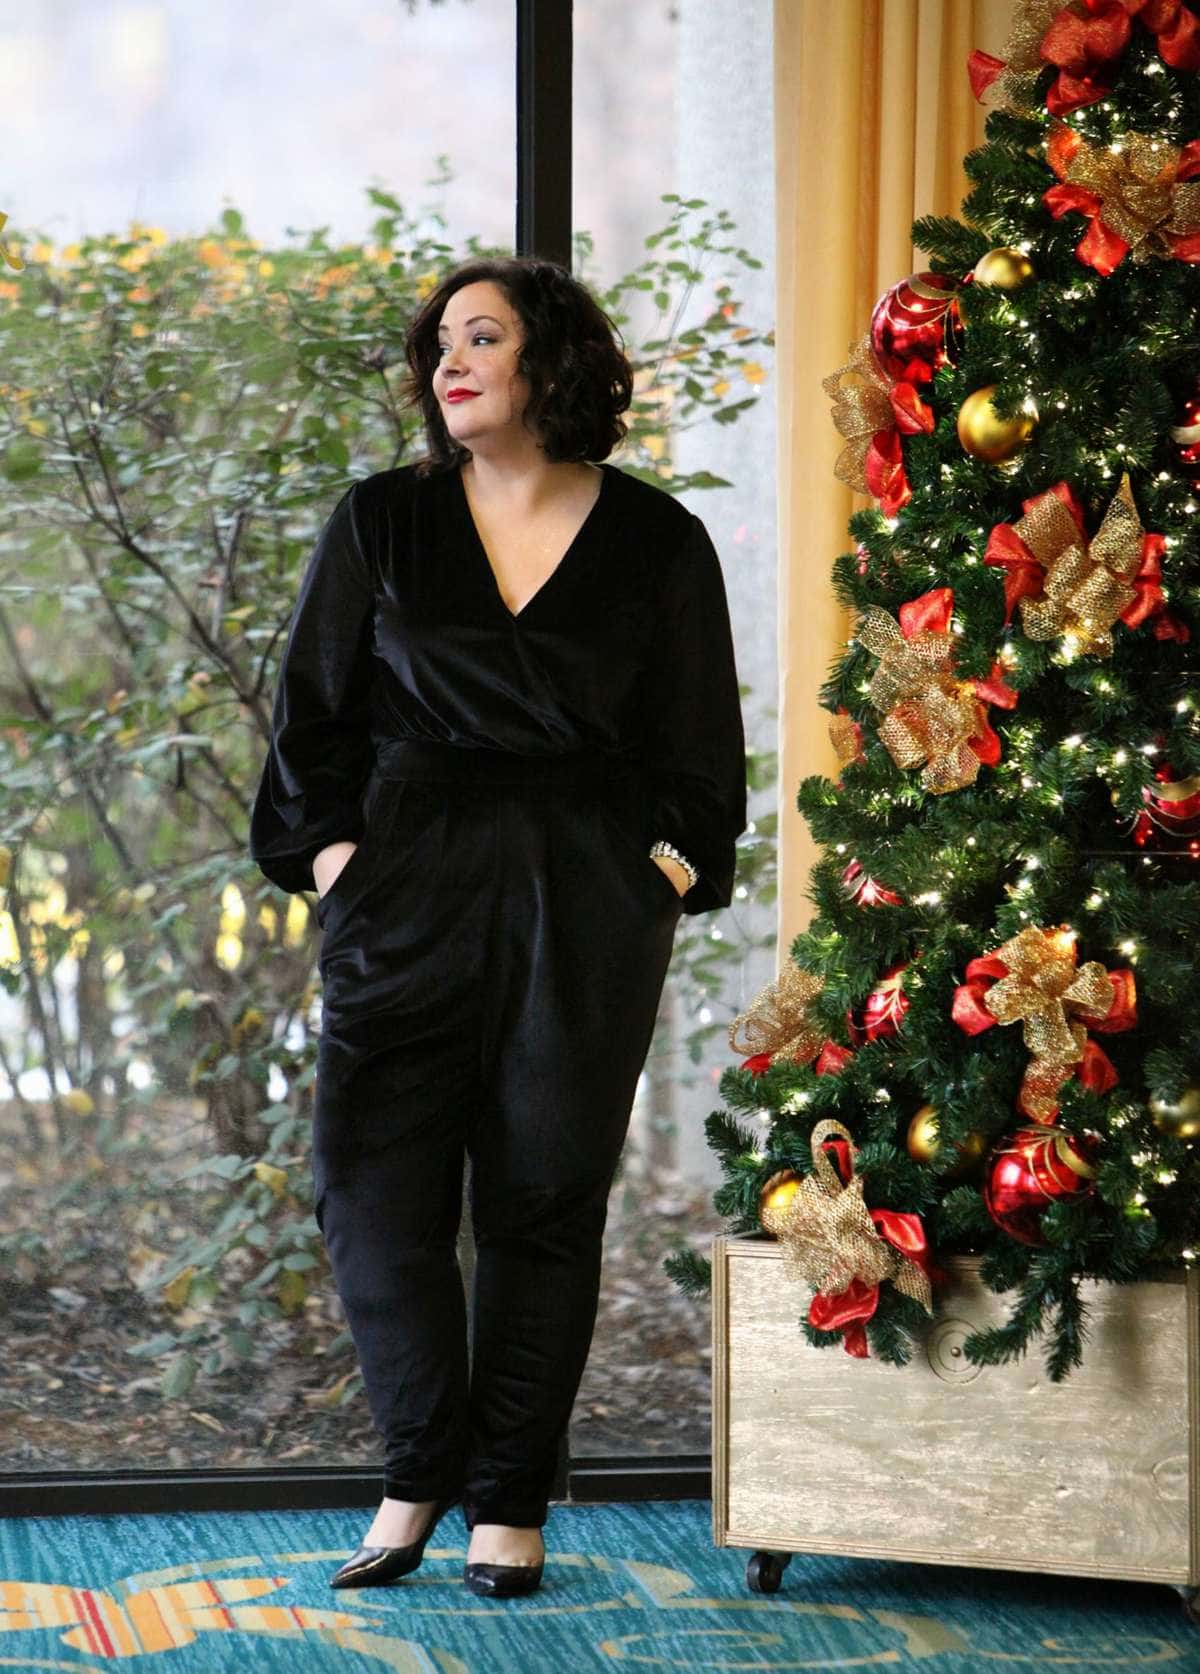 What I Wore: Relax and Be Festive